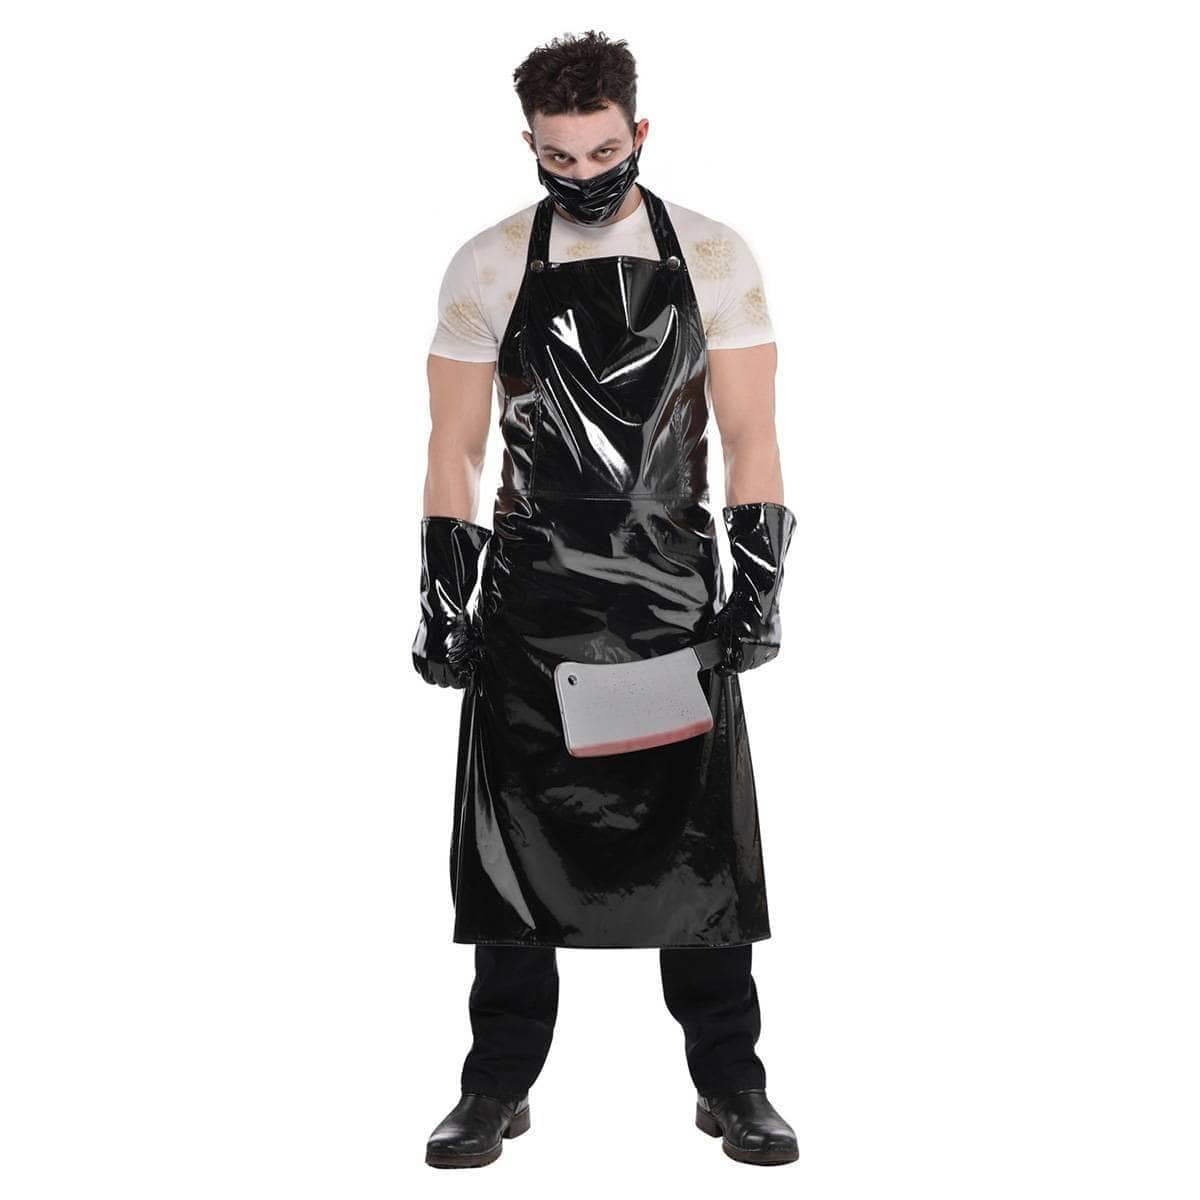 Buy Costume Accessories Butcher costume kit for men sold at Party Expert